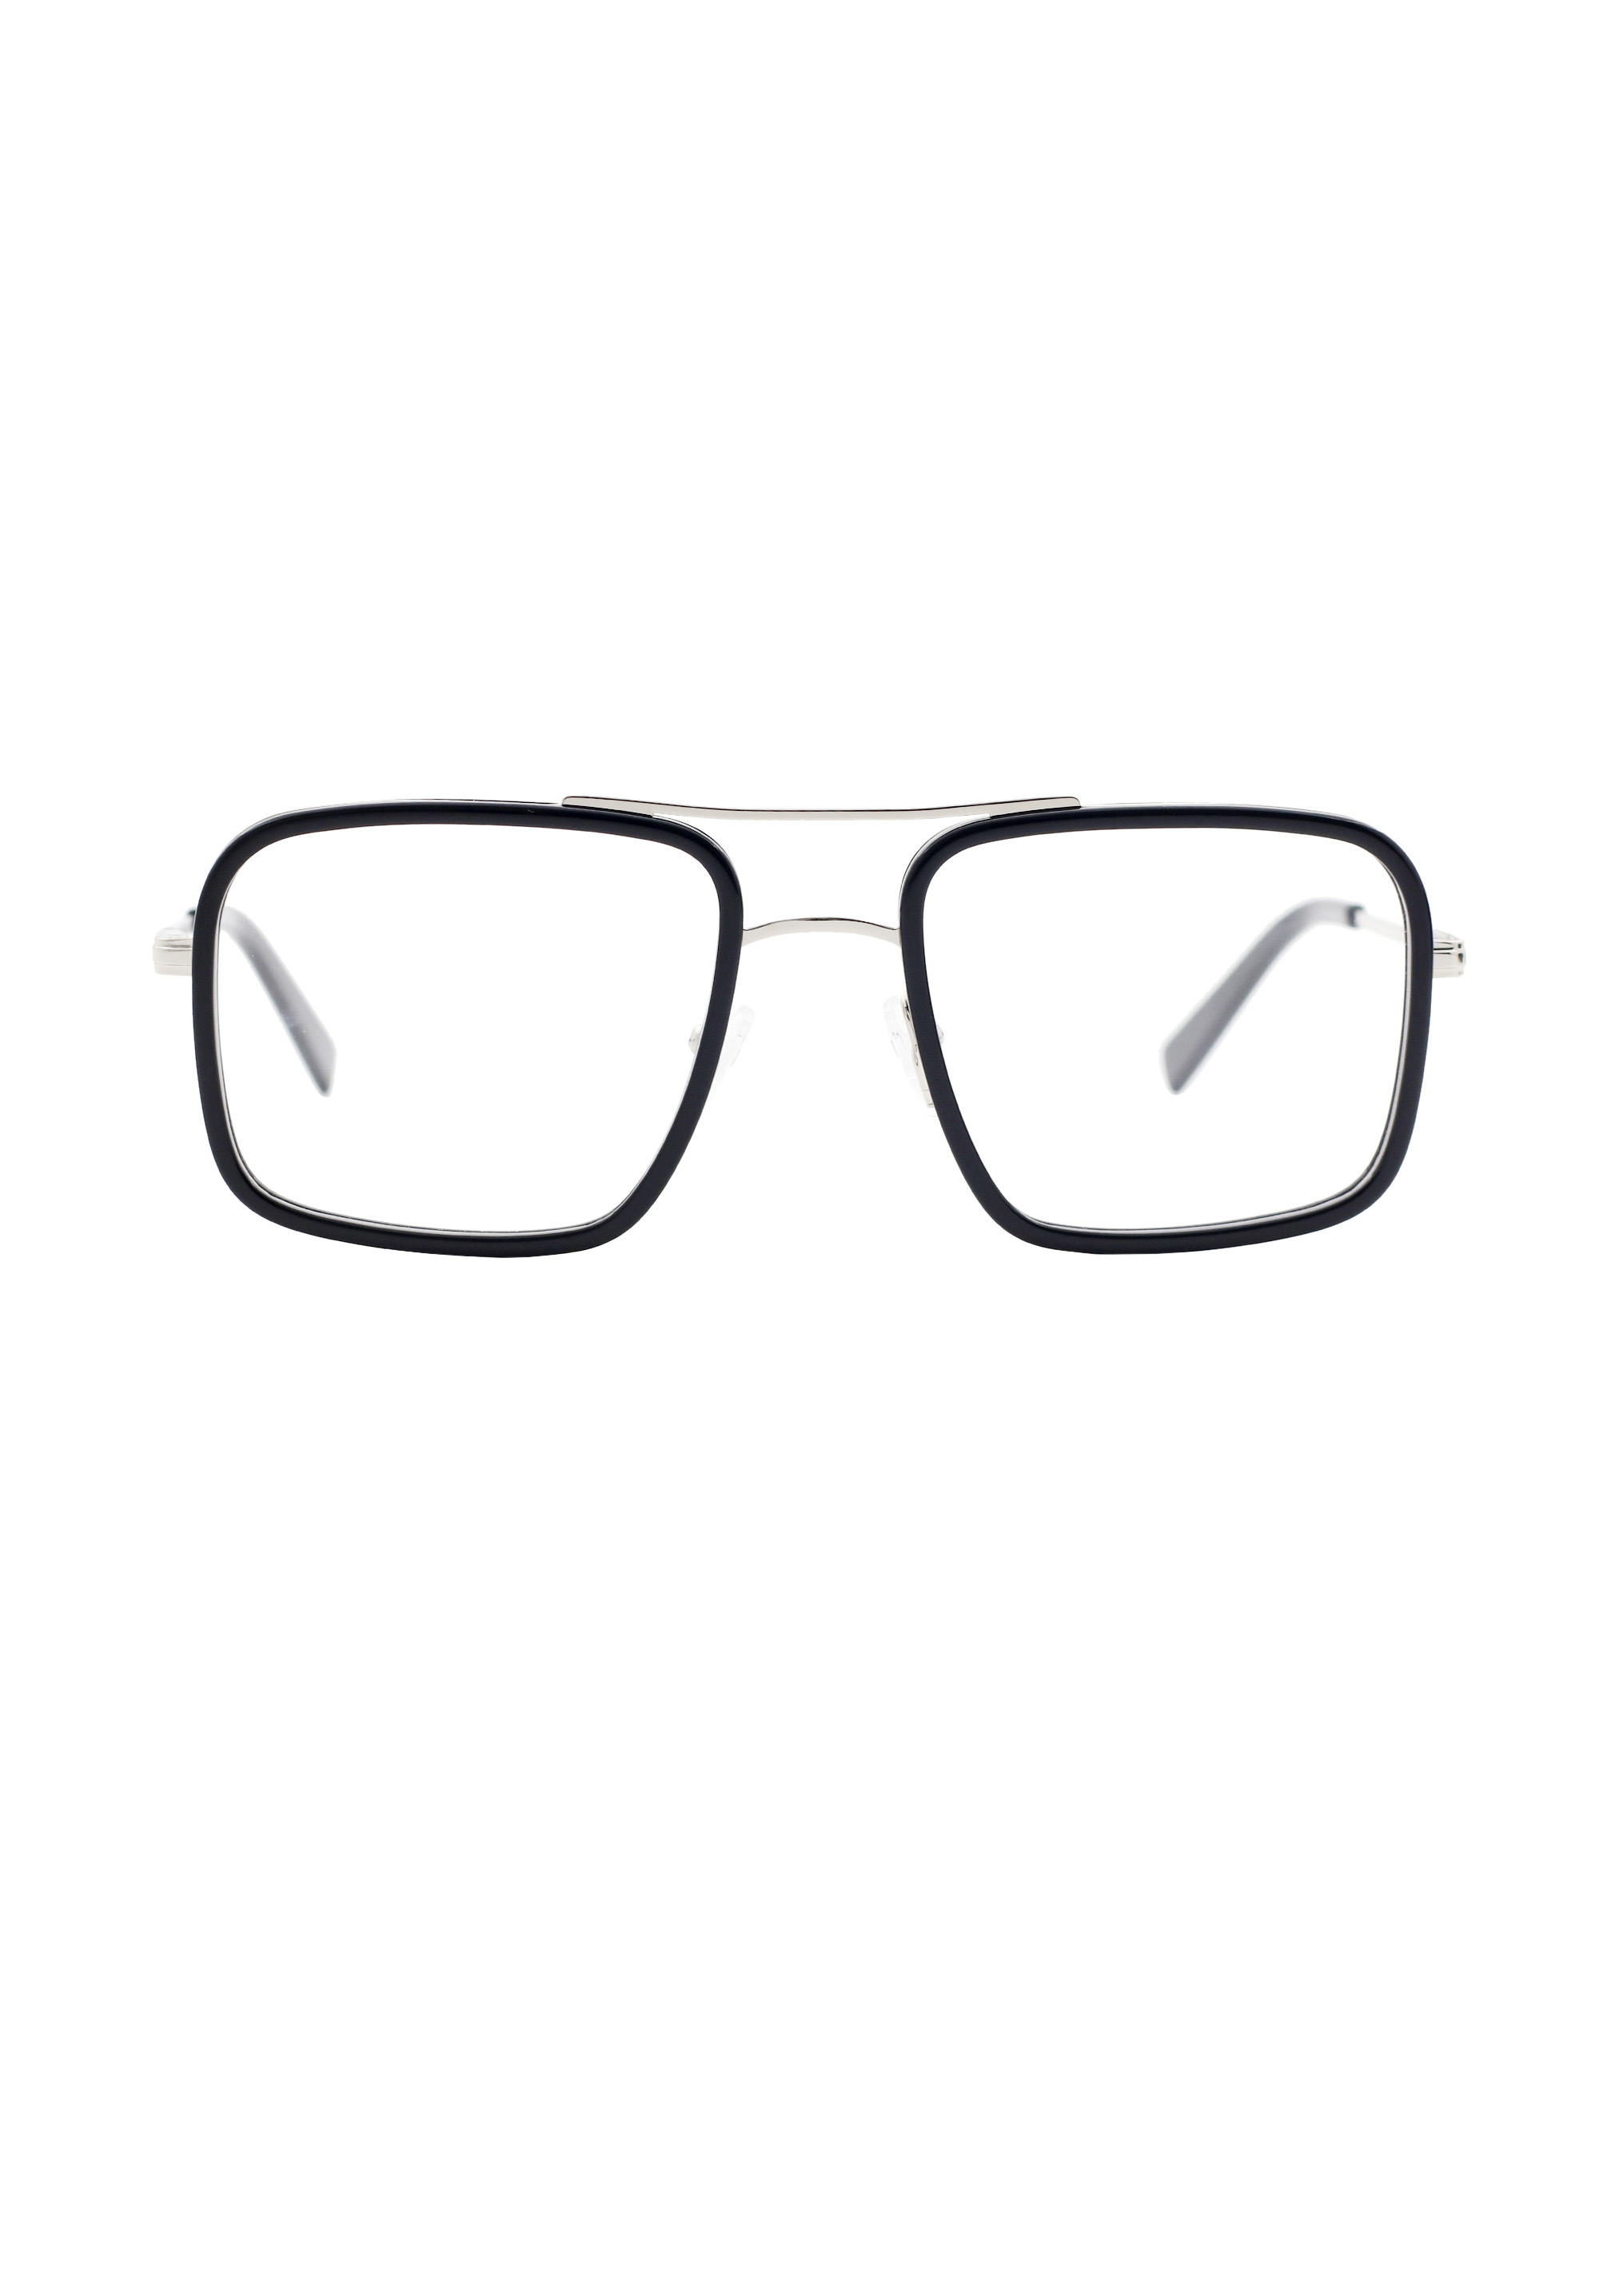 Men’s Square Optical Glasses Frame Featured Image